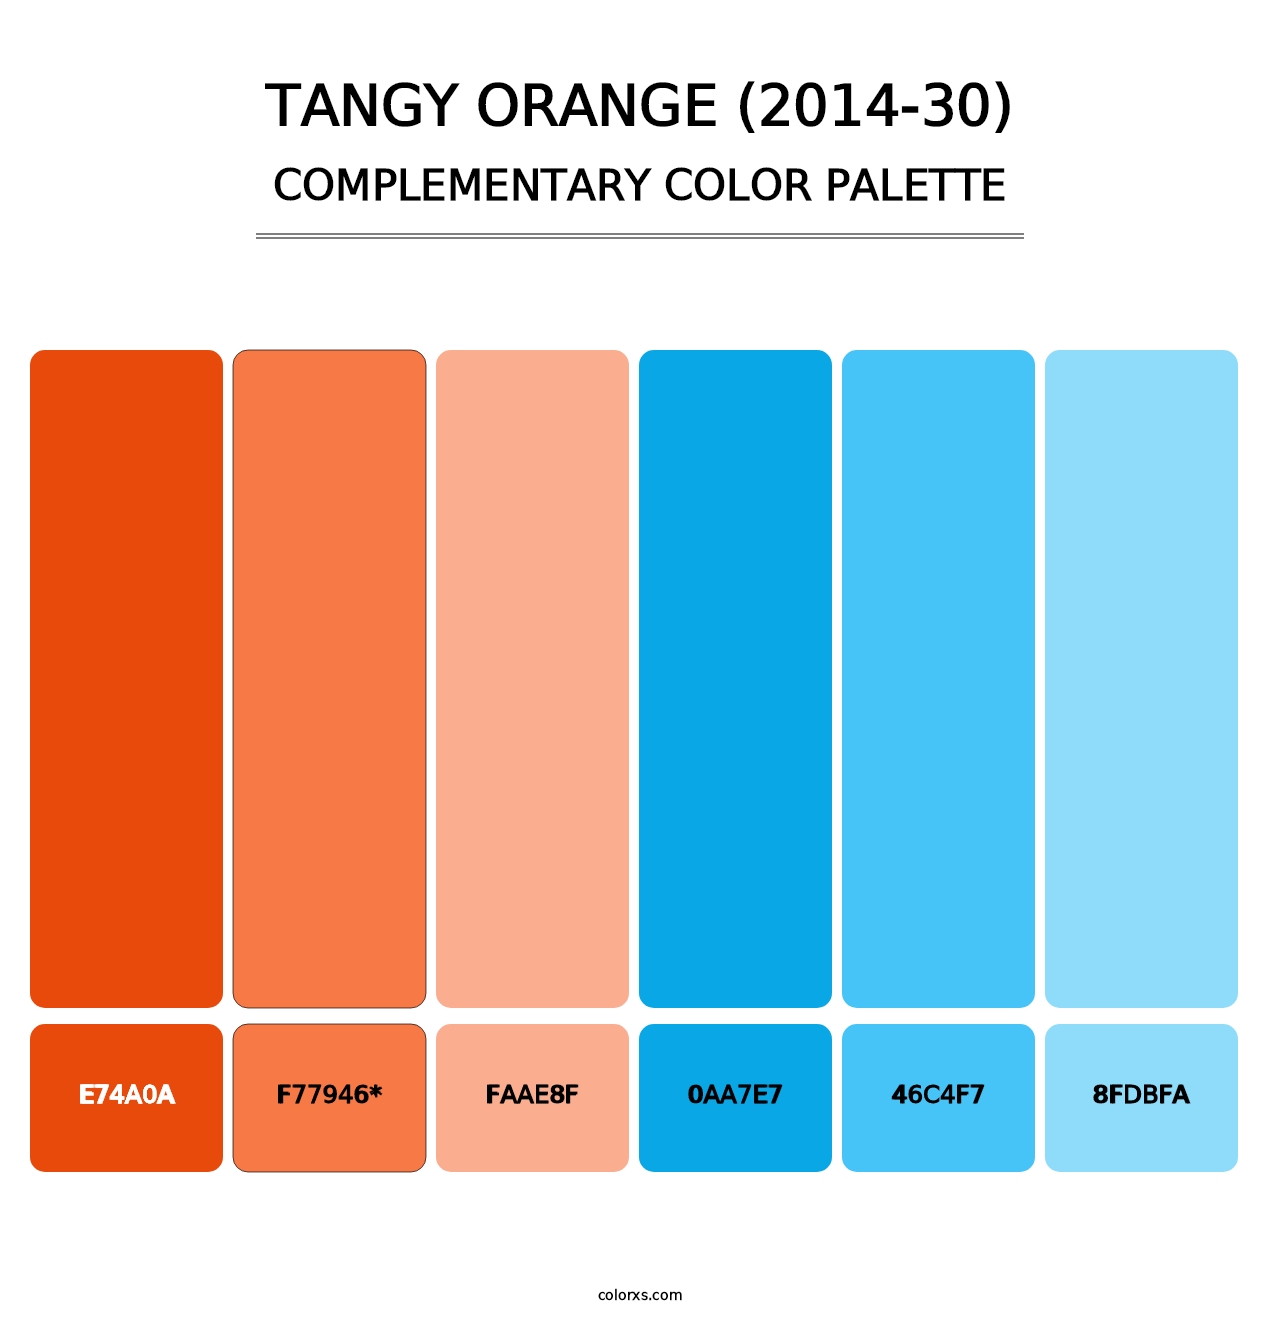 Tangy Orange (2014-30) - Complementary Color Palette